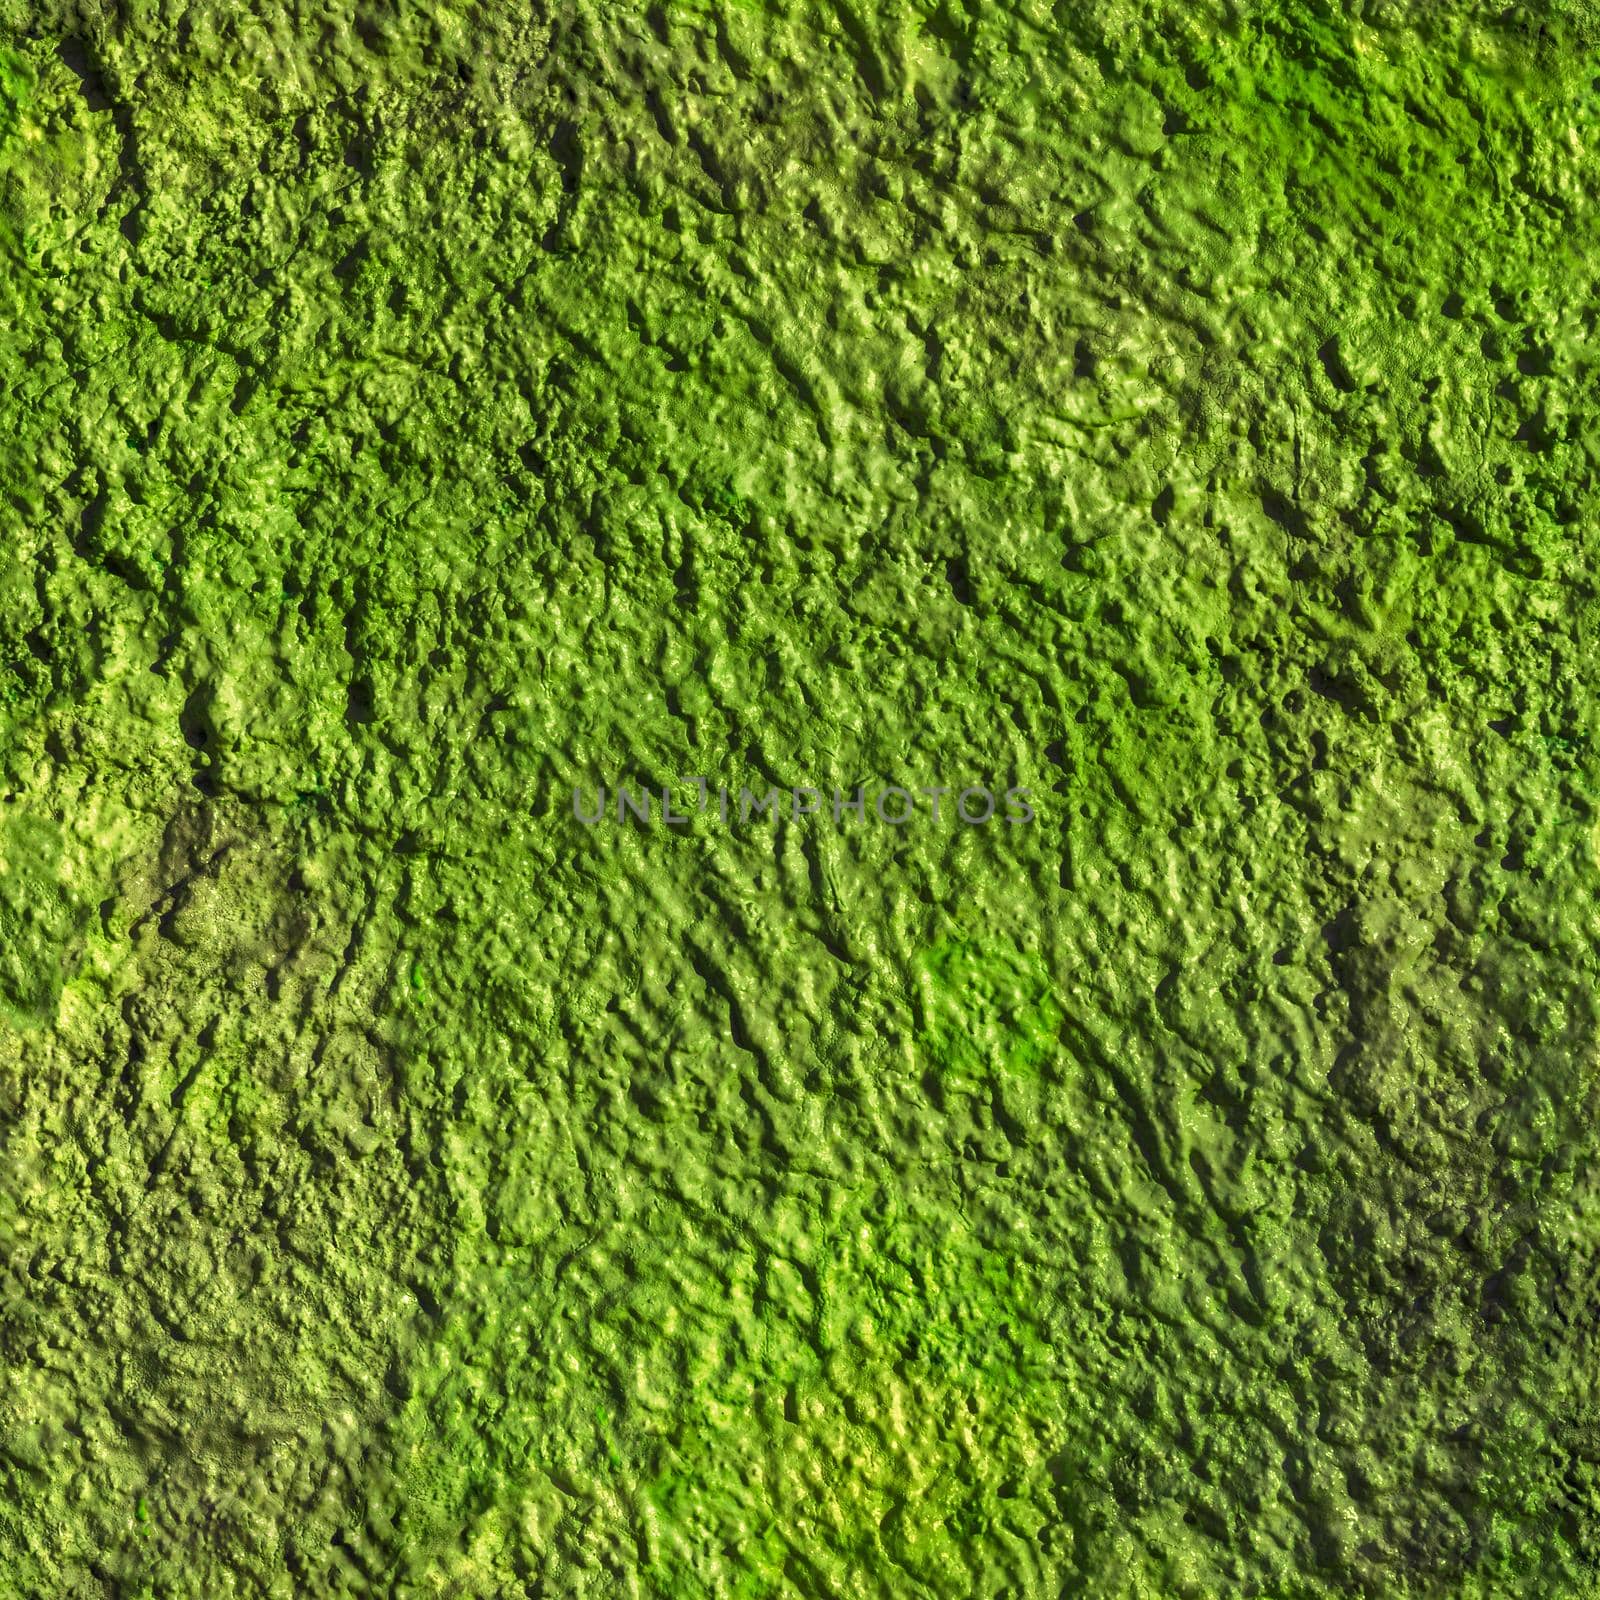 Gloiss painted plaster wall seamless square texture. Direct sunlight with hard shadows.